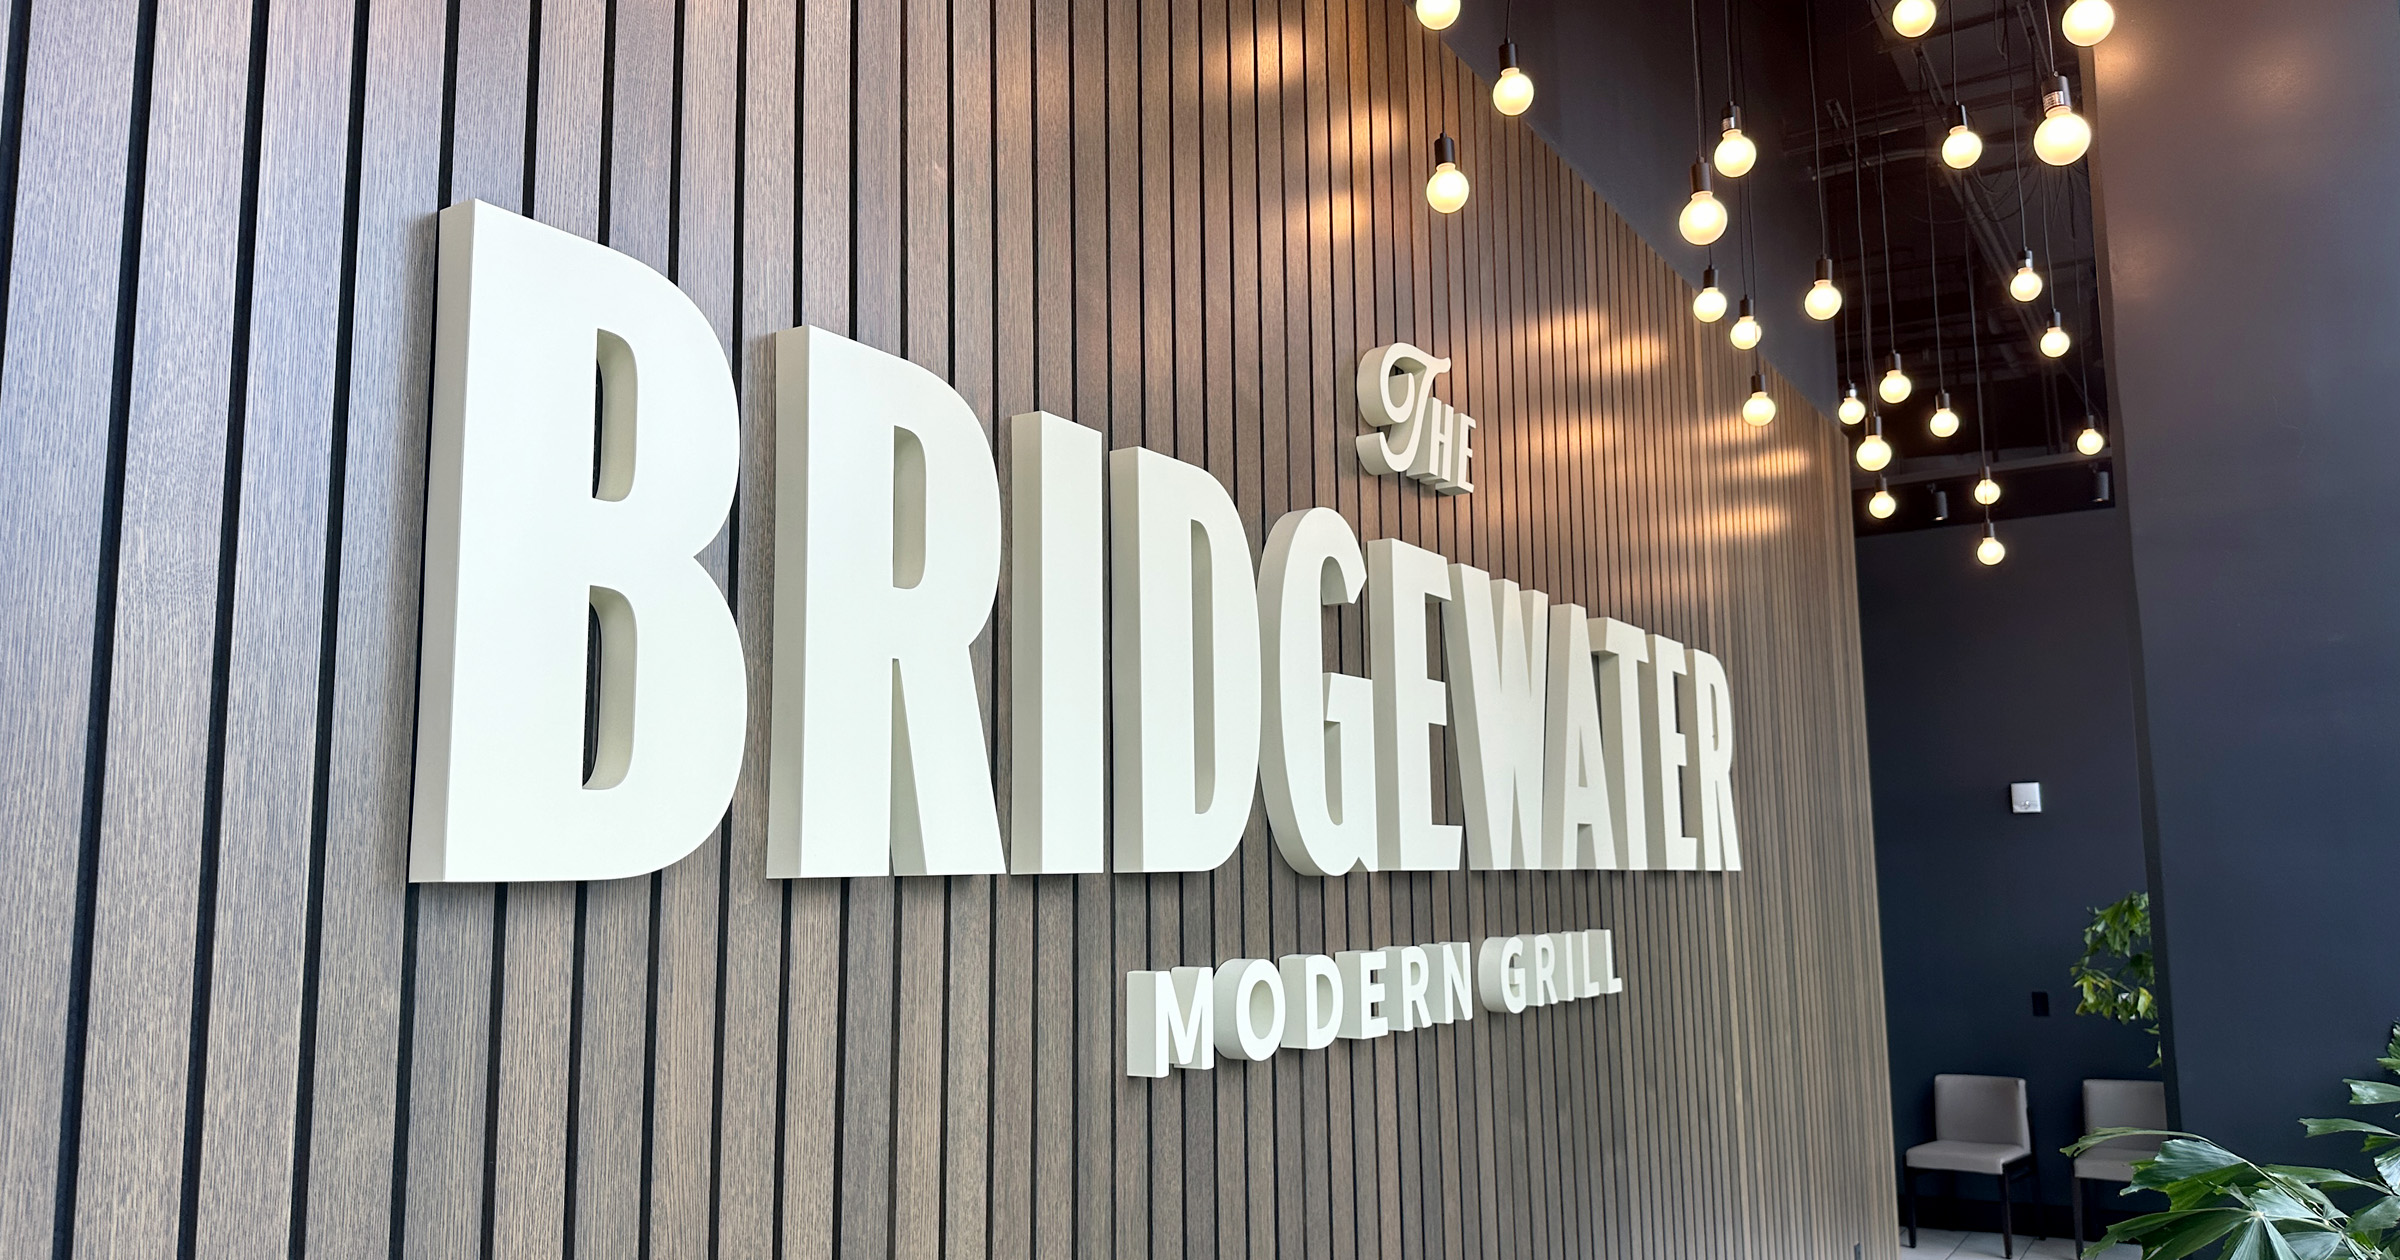 "The Bridgewater Modern Grill" white signage on a wooden slated wall.